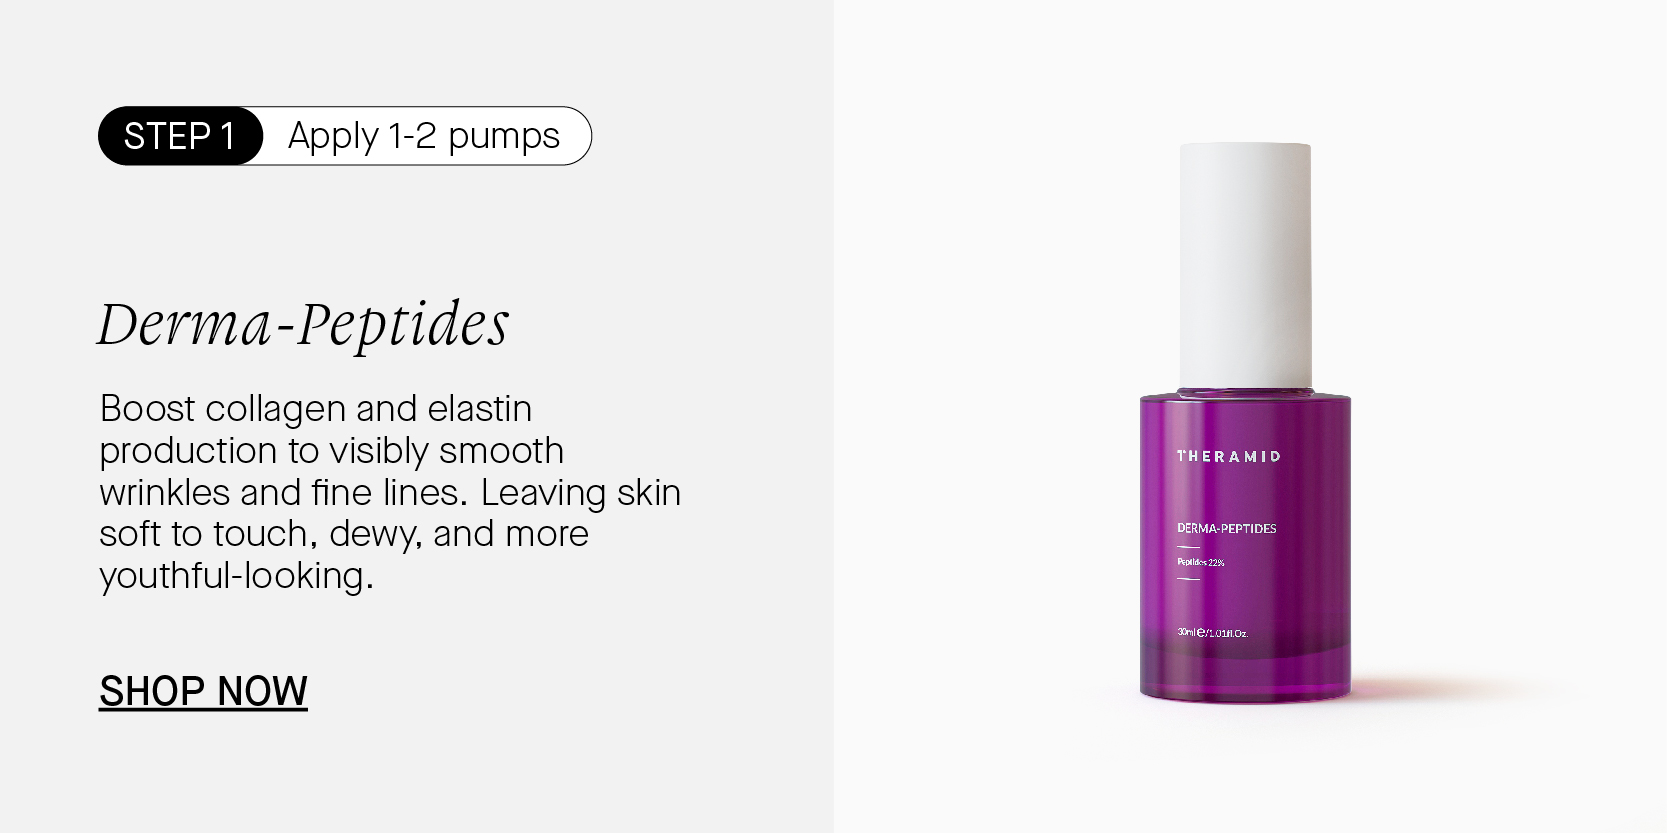 YN Apply 1-2 pumps Derma-Peptides Boost collagen and elastin production to visibly smooth wrinkles and fine lines. Leaving skin soft to touch, dewy, and more youthful-looking. SHOP NOW 